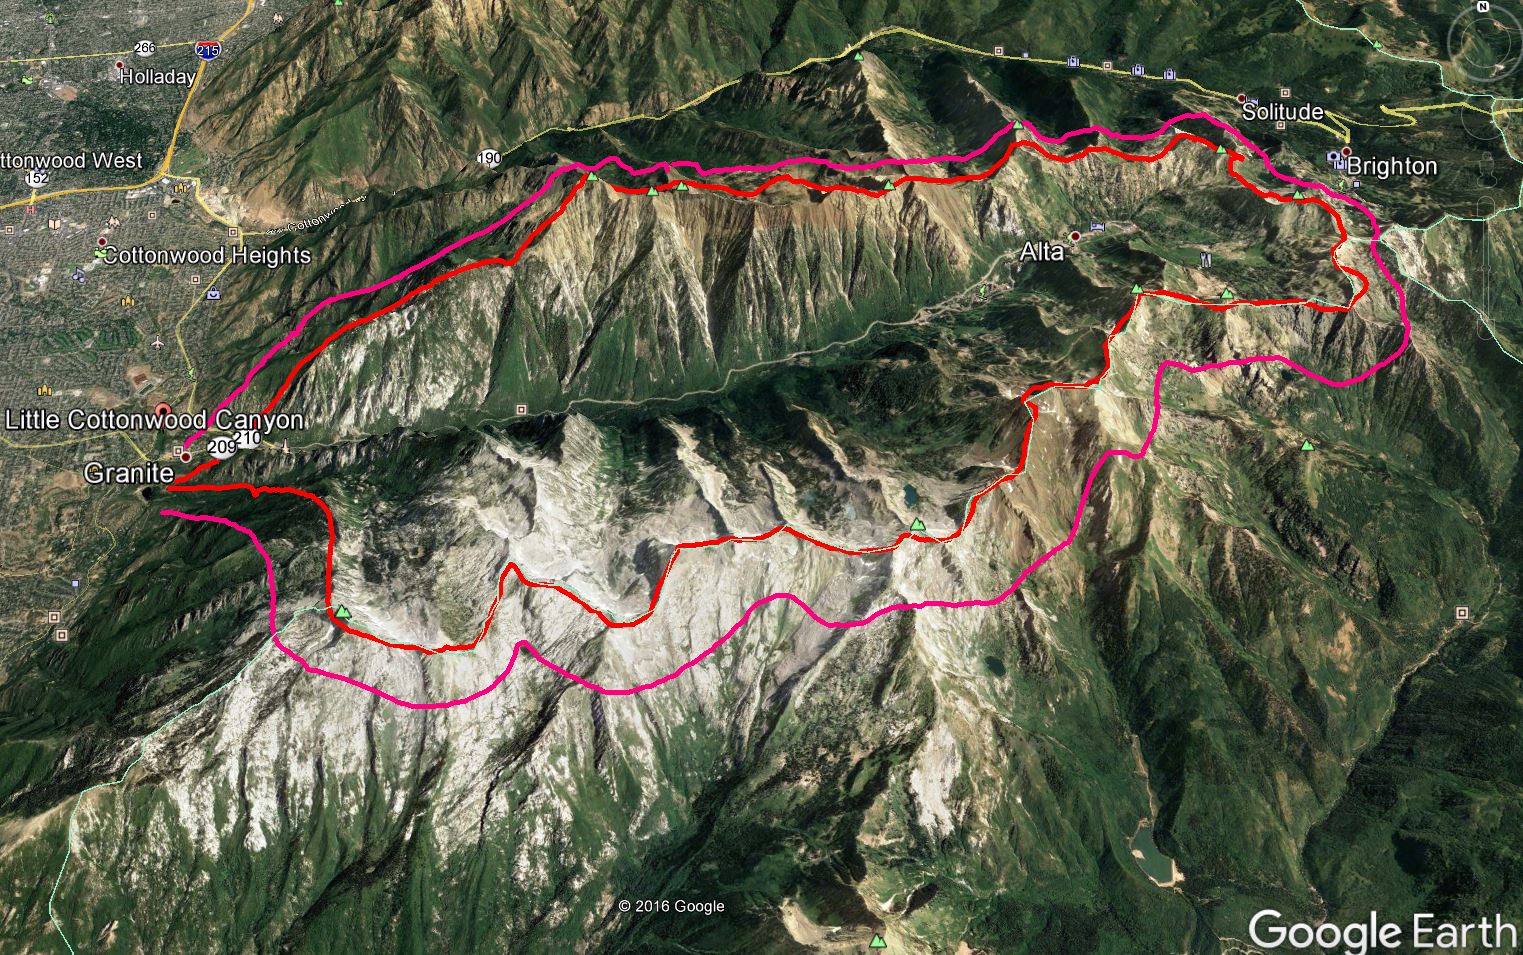 All of Little Cottonwood Canyon (outlined in red) PLUS a 1km buffer over the ridgeline (in pink) will be closed for backcountry use when UDOT is shooting, and even 12 hours before.